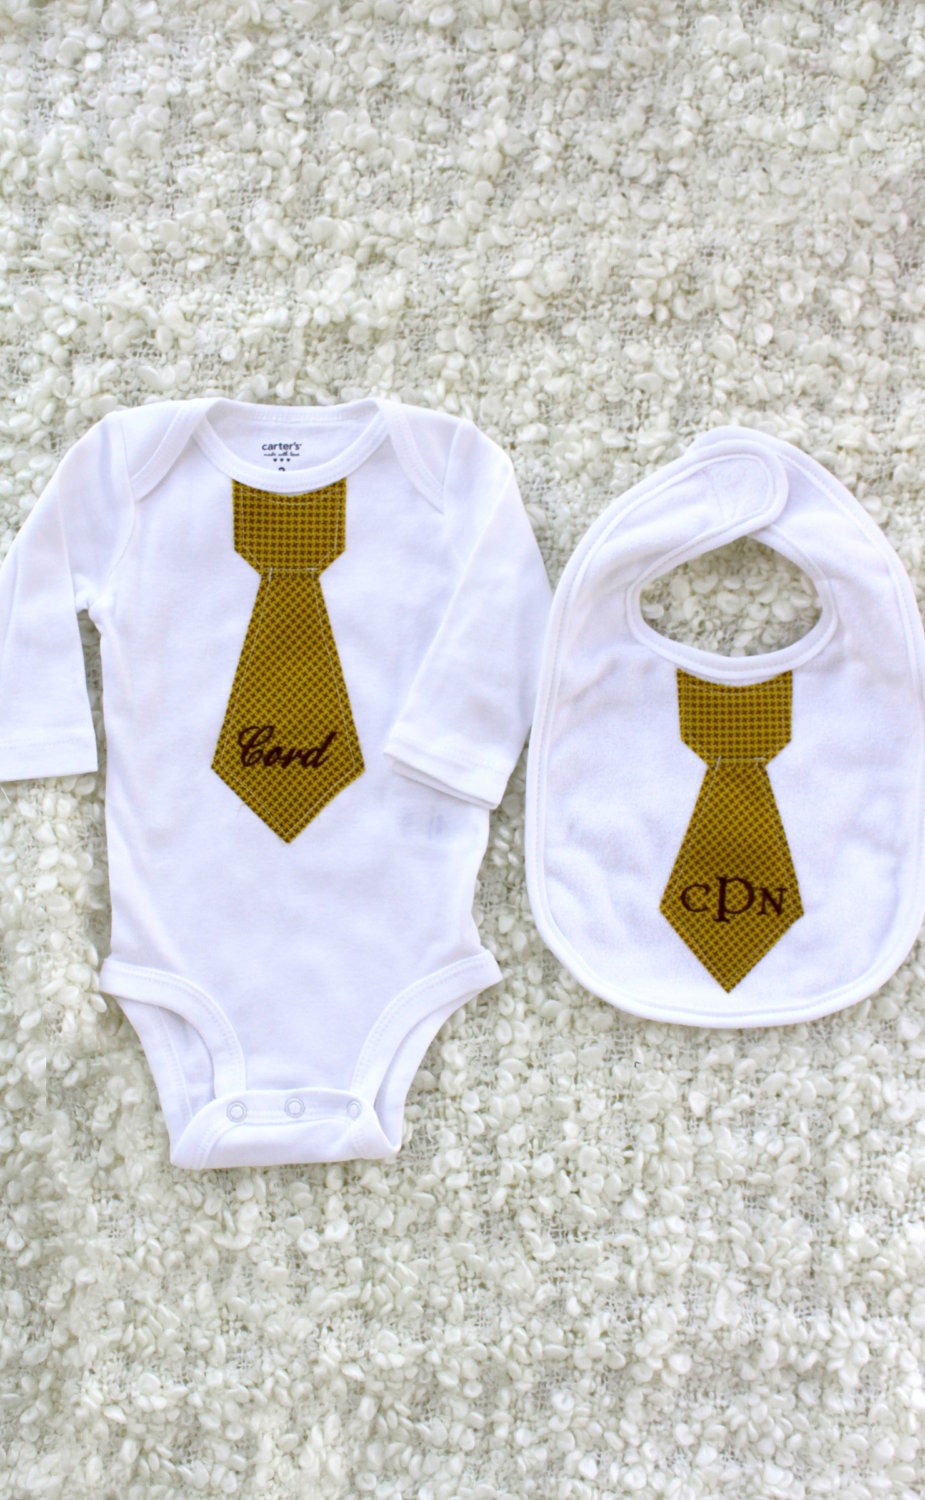 Mustard Yellow and Brown Hounds Tooth Personalized SET of Tie Onesie and Tie Bib.  Any Name or Monogram Embroidered on Any Tie Onesie & Bib. - ChicCoutureBoutique